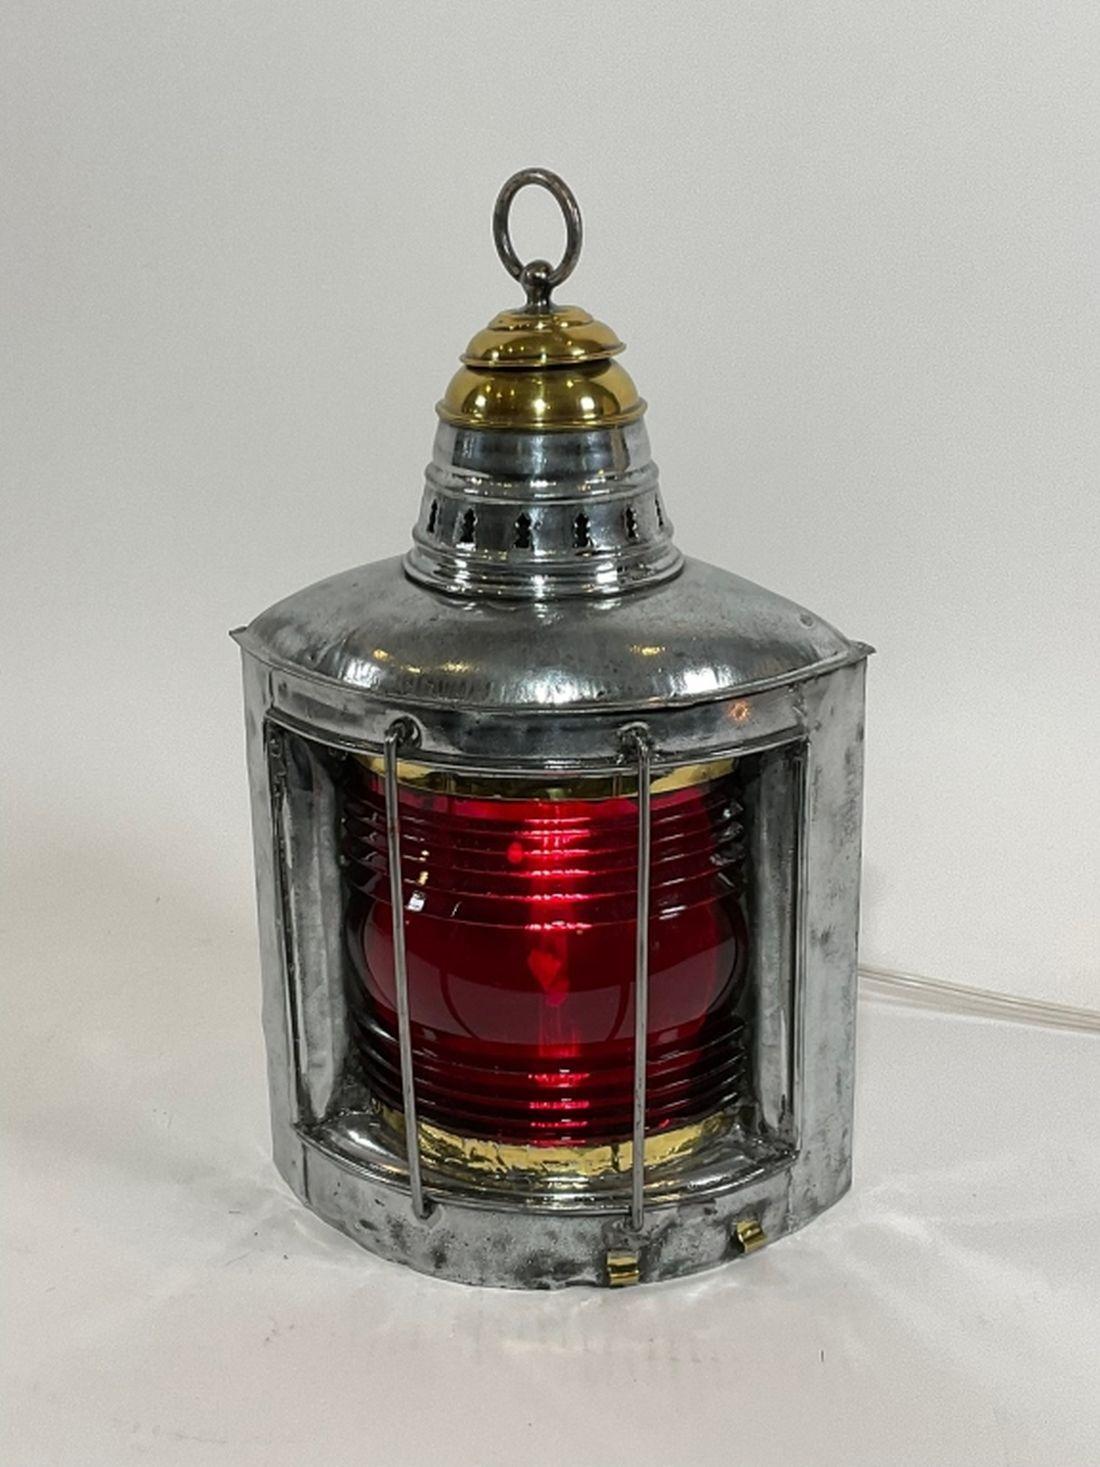 Nautical port lantern. Antique lantern with Fresnel glass lens. Rich ruby red lens. Wired with electricity. Polished steel case and brass cap with carry loop. Two bars protect the lens.

Dimension; 18